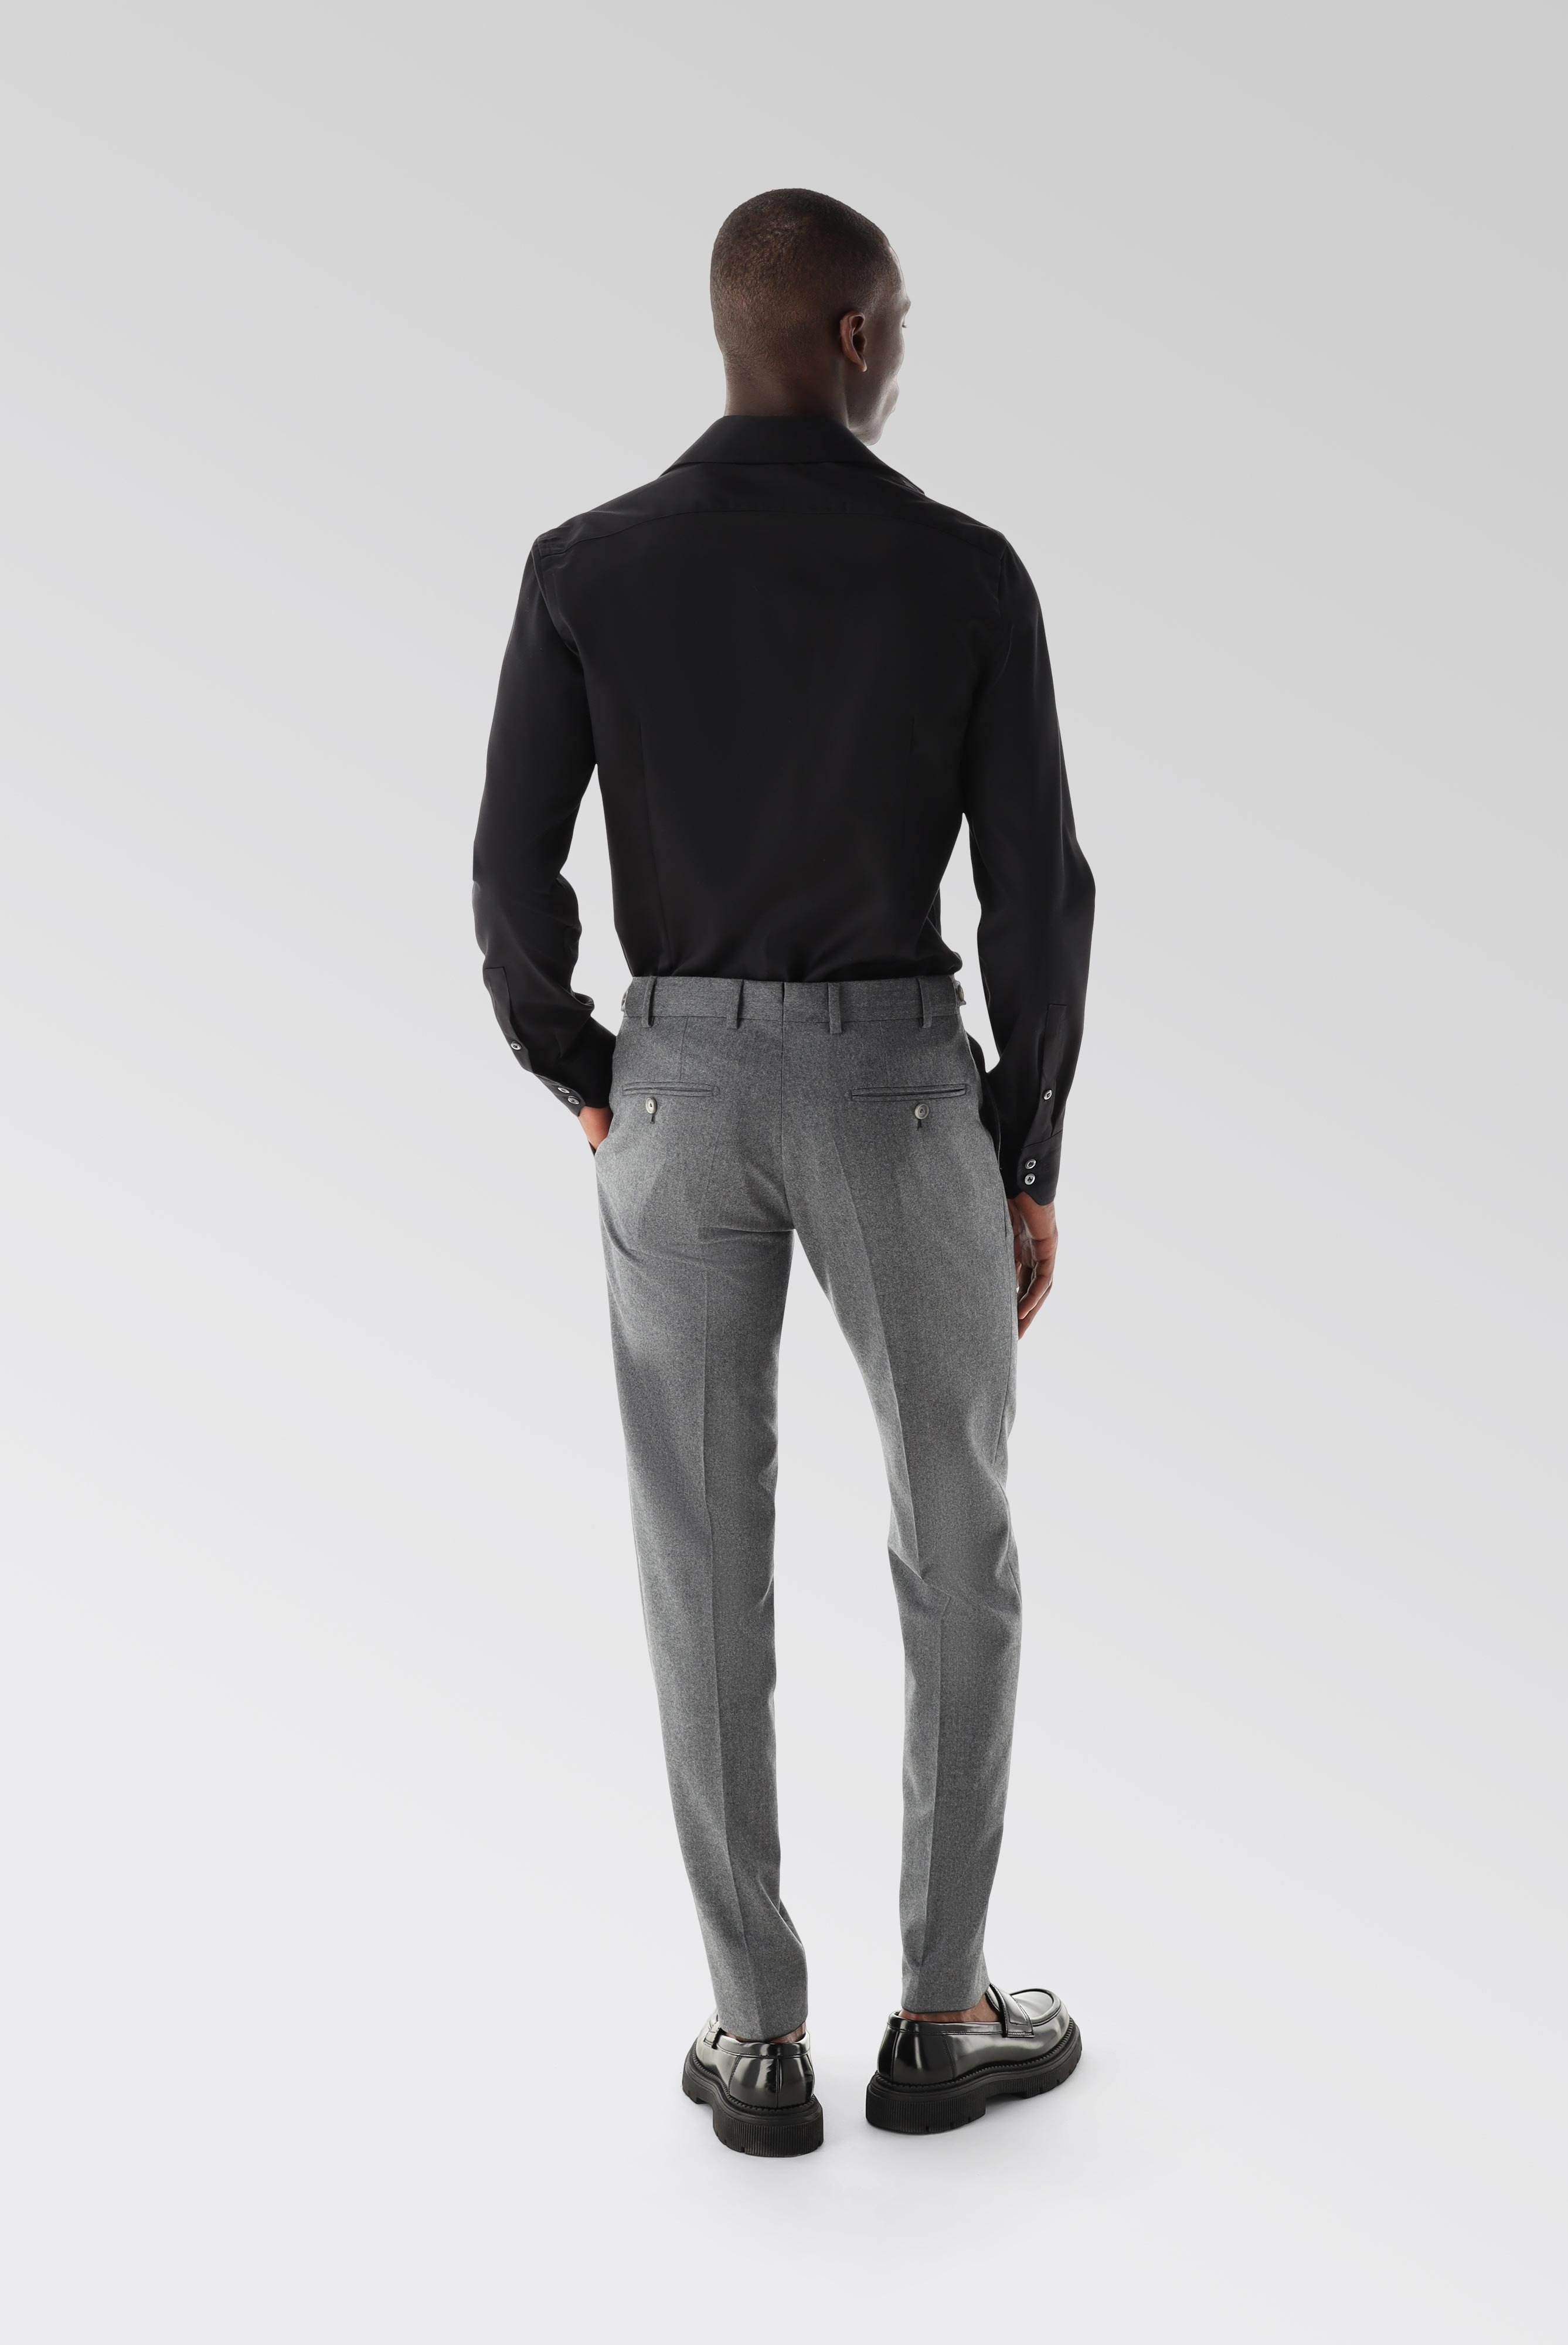 Jeans & Trousers+Wool-Flanell Trousers Slim Fit+20.7854.16.H00029.040.48